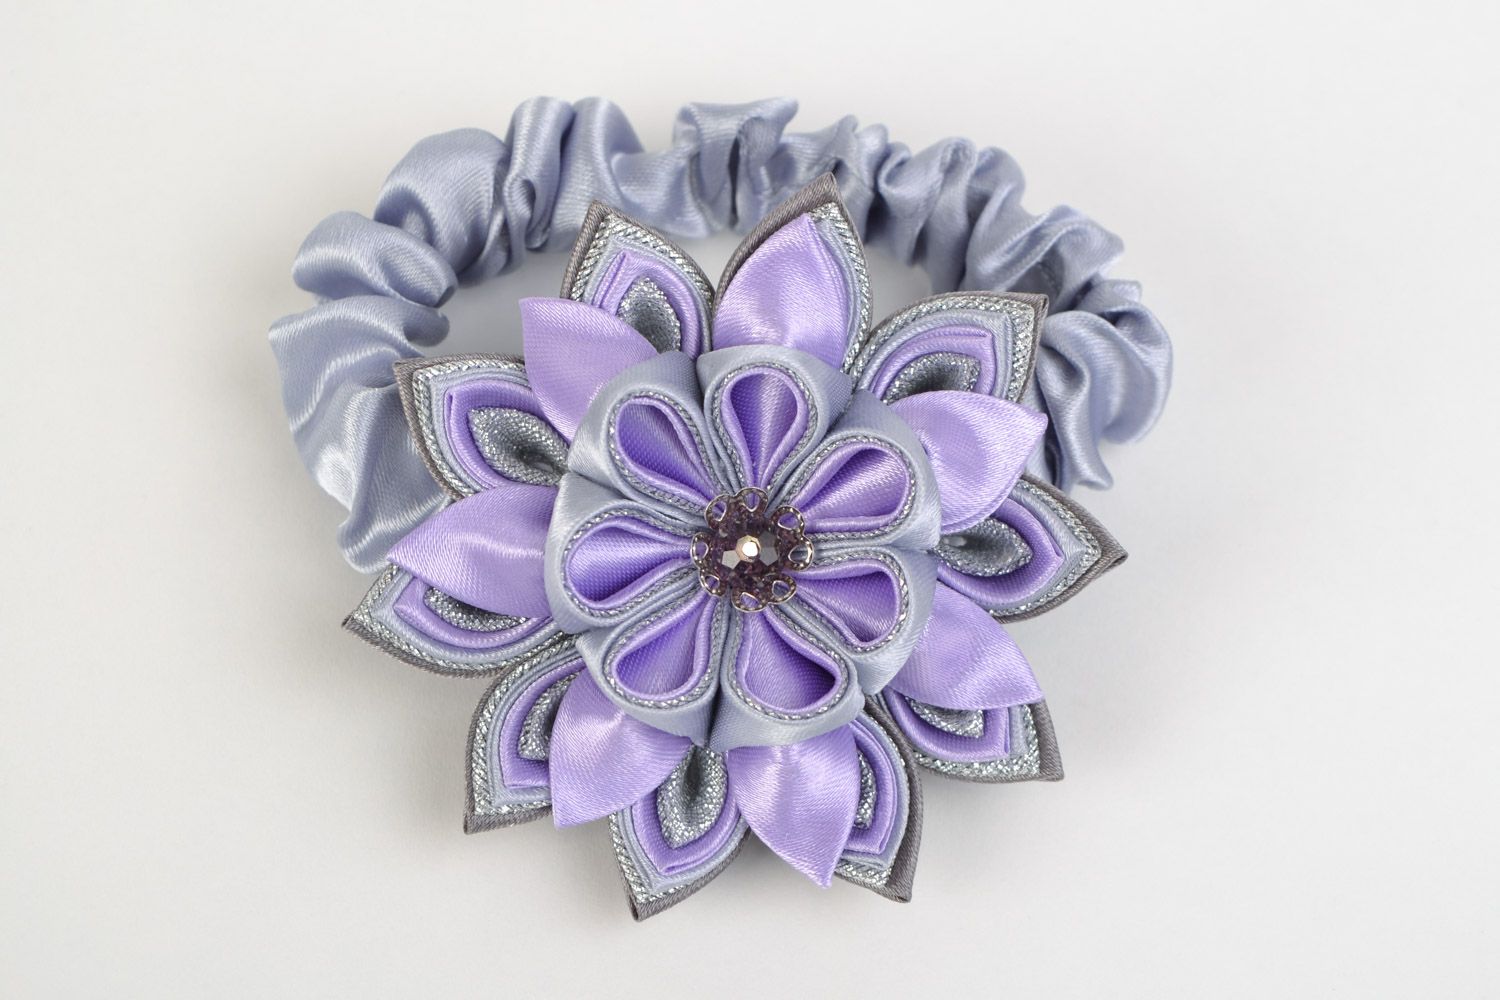 Large handmade kanzashi flower hair tie of lilac and gray colors photo 3